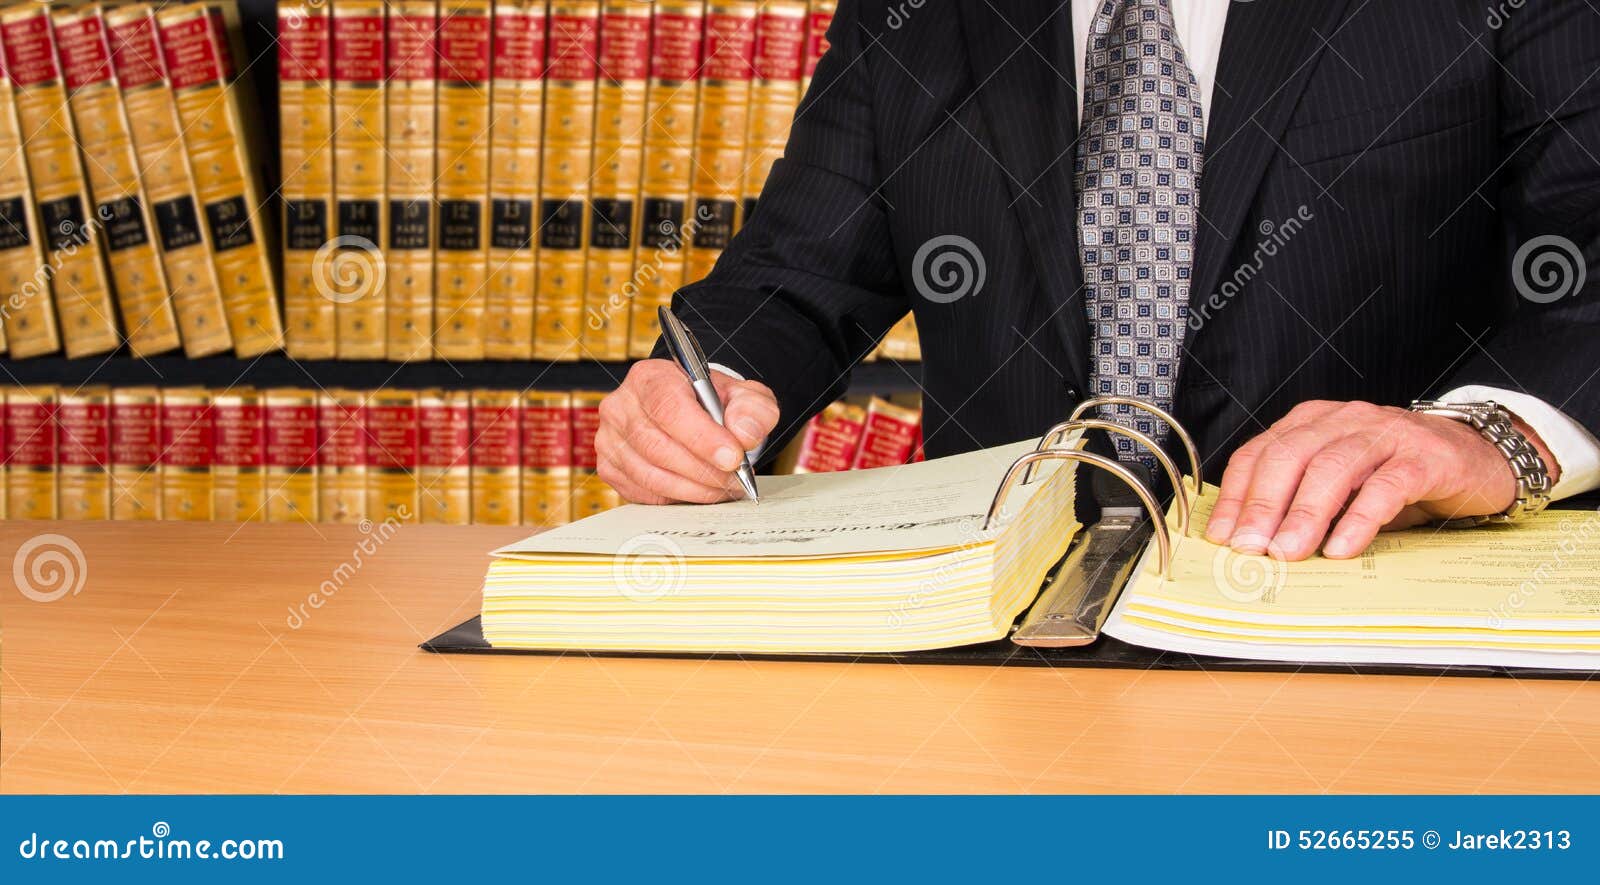 lawyer signing legal documents